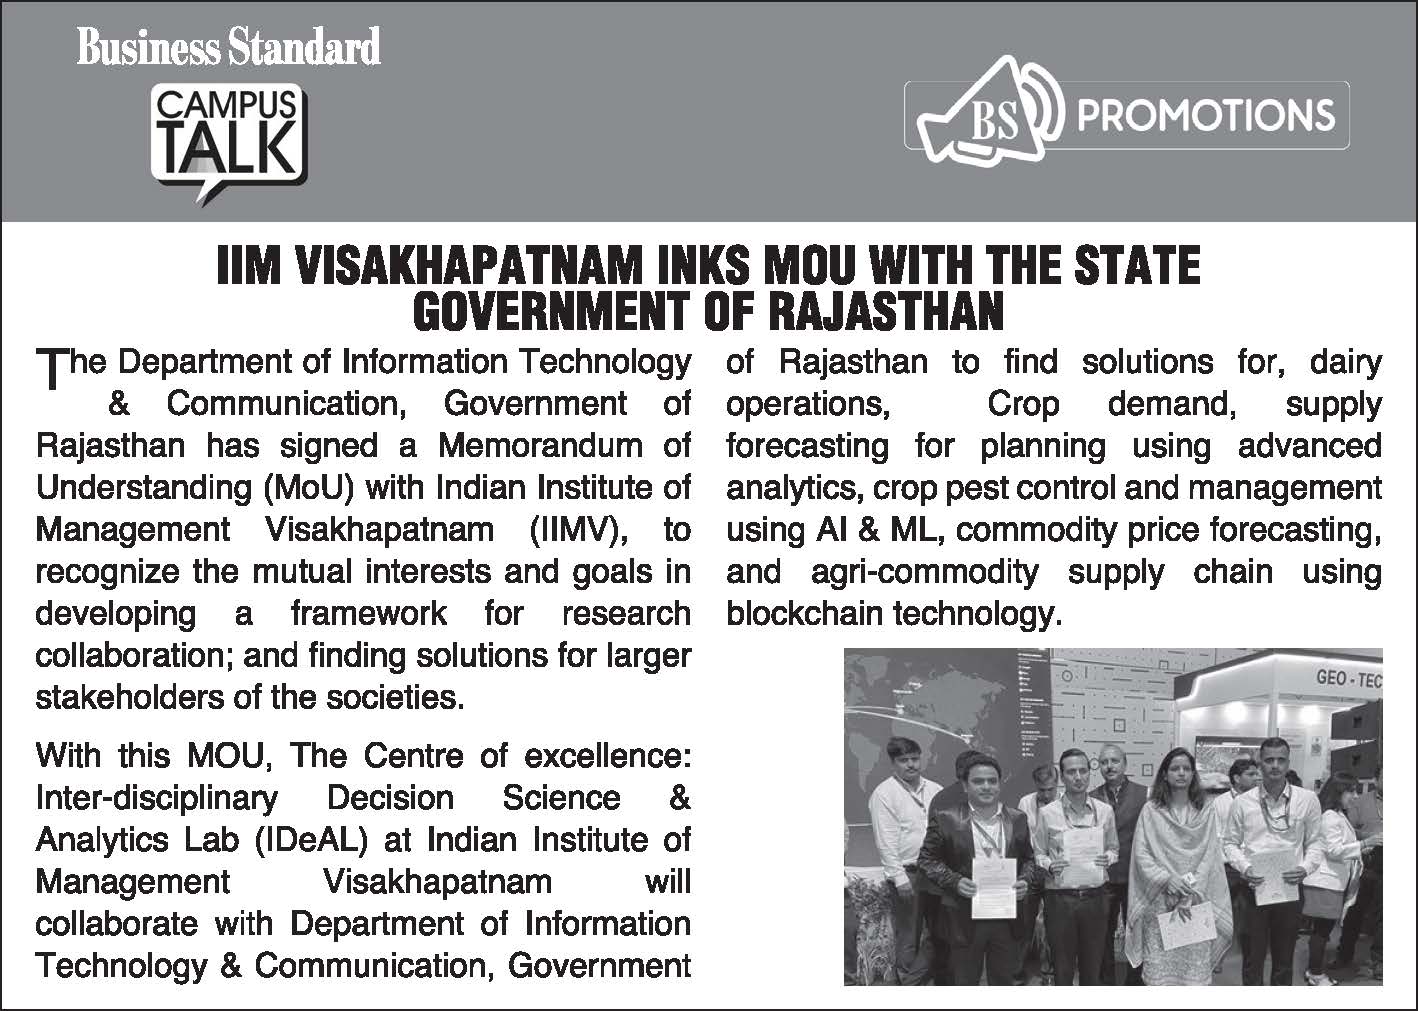 IIM Visakhapatnam inks MOU with the state government of Rajasthan - 31.03.2023